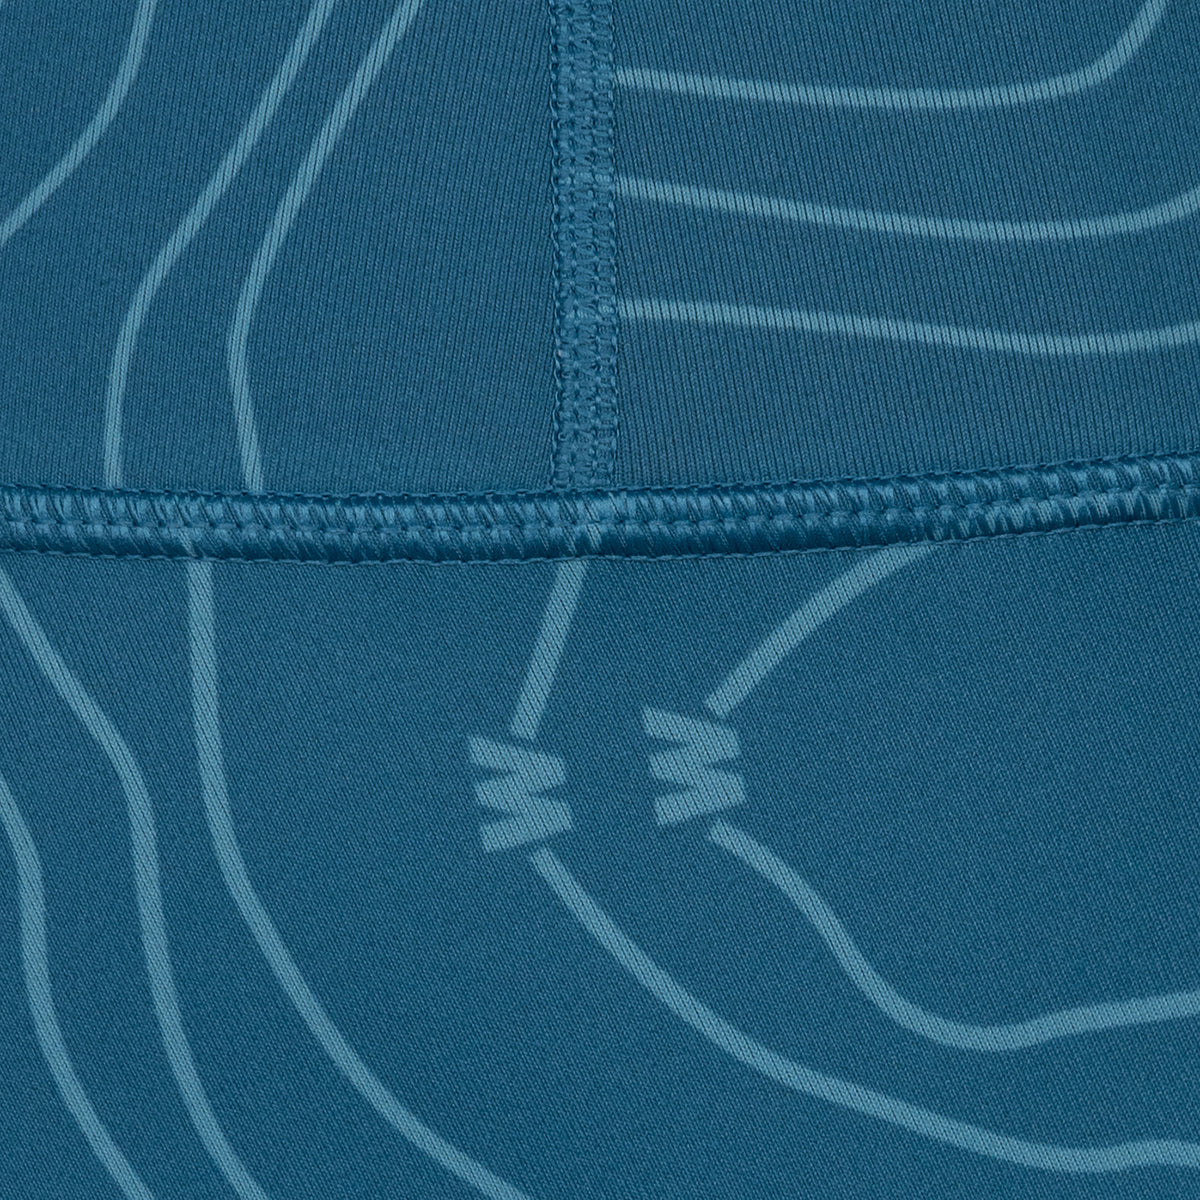 closeup of seams and bathymetic line pattern on Dark blue high waisted 7/8 legging with light blue bathymetic line pattern